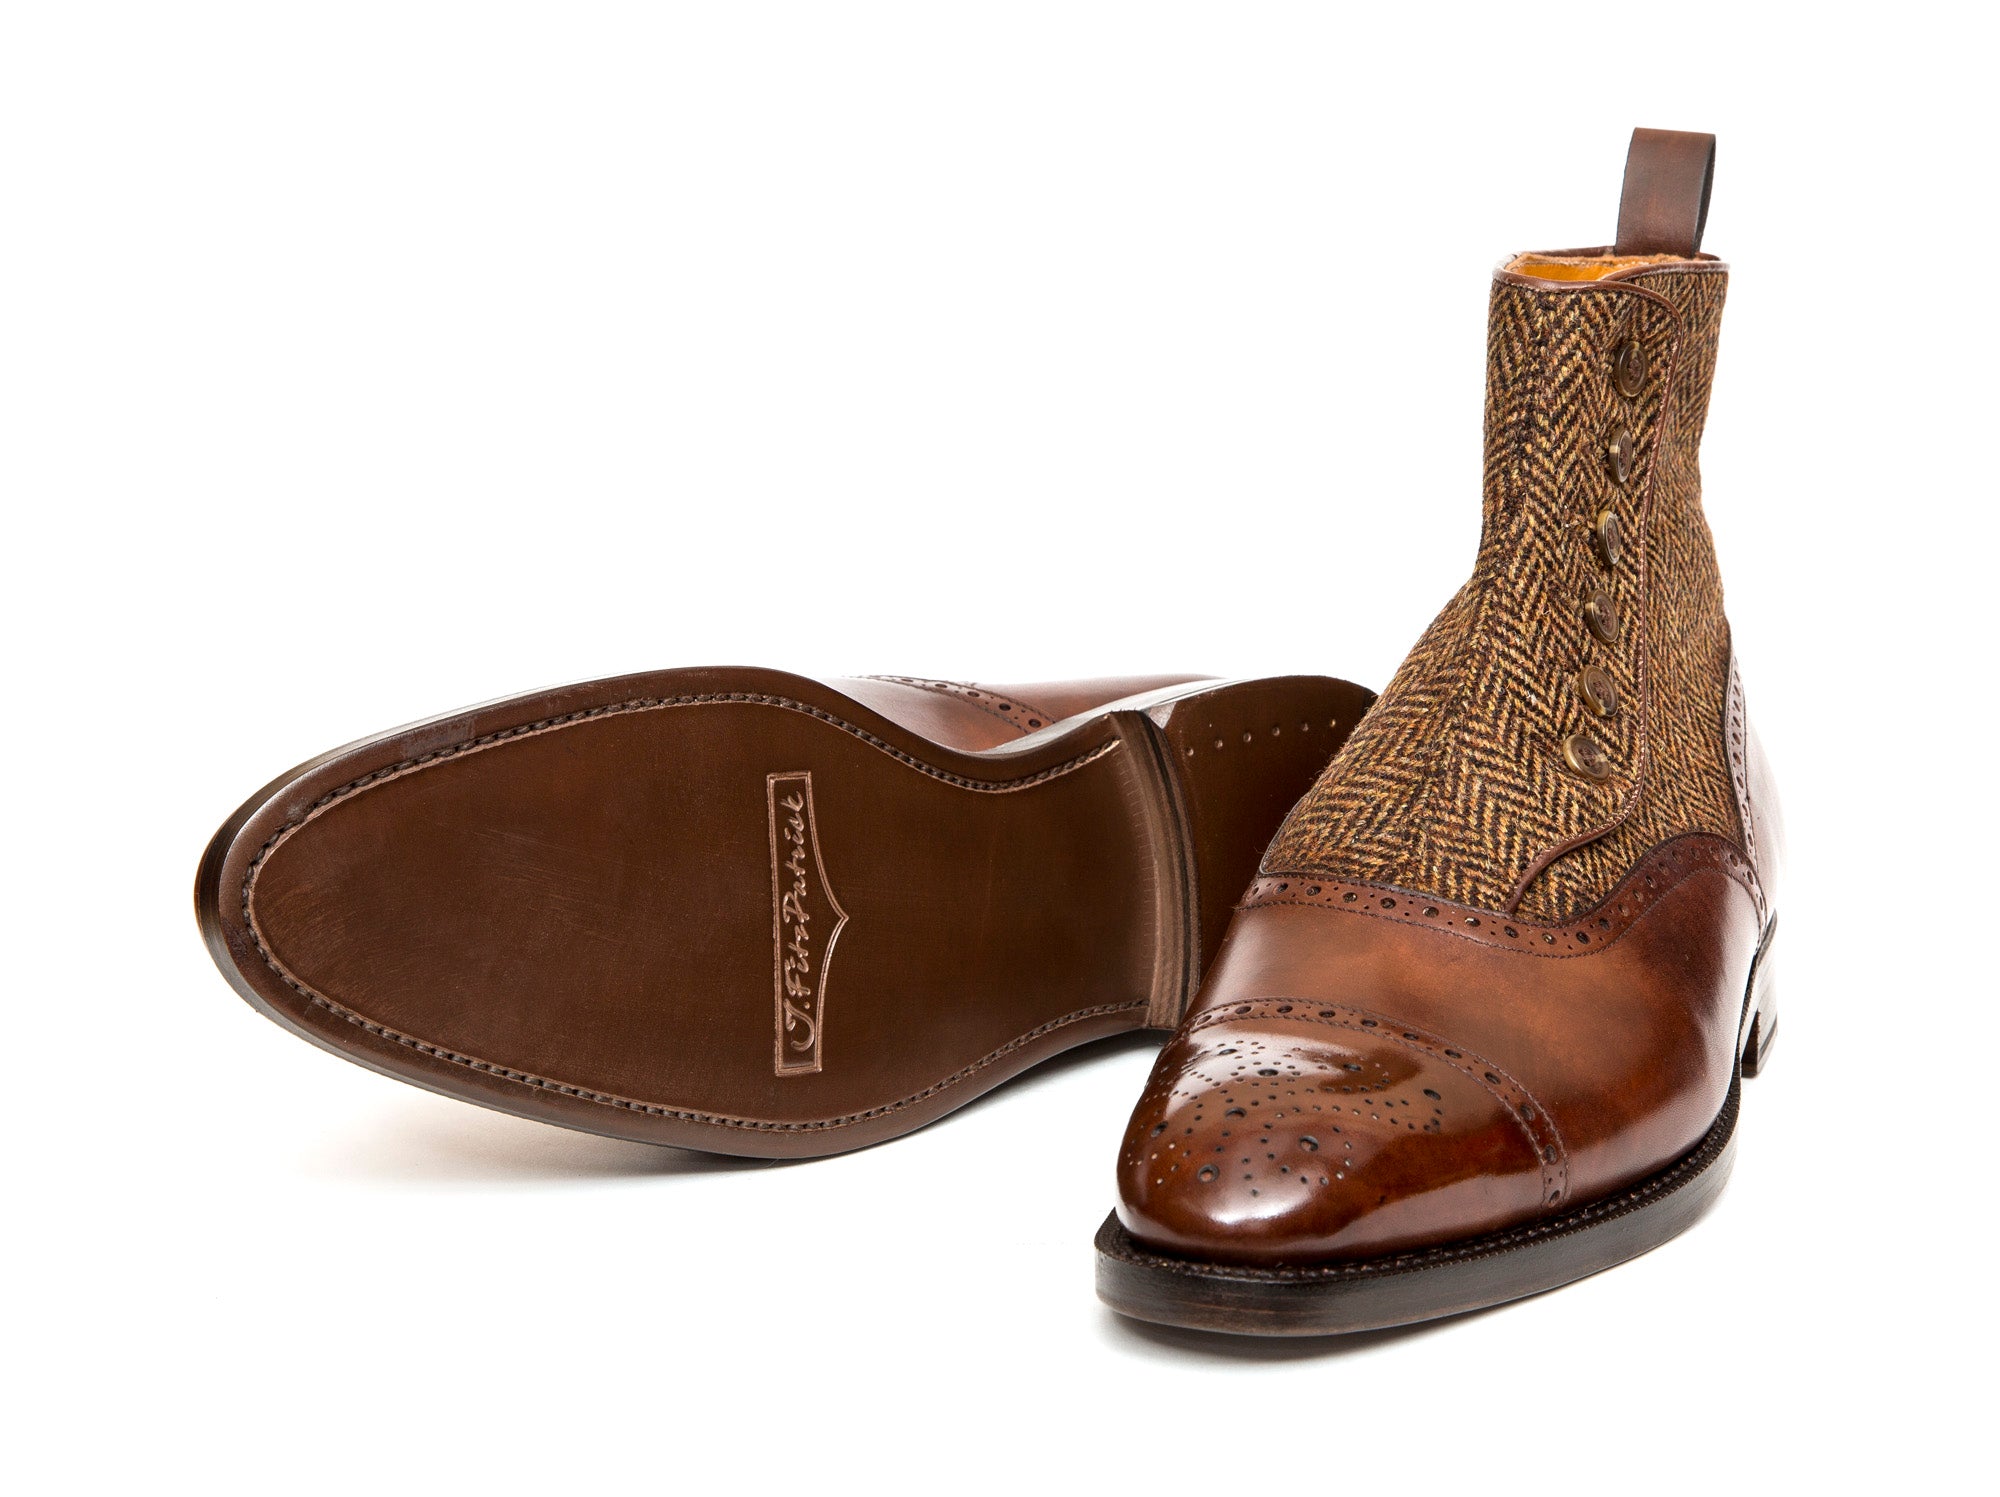 Puyallup - MTO - Gold Museum Calf / Gold Tweed - NGT Last - Double Leather Sole